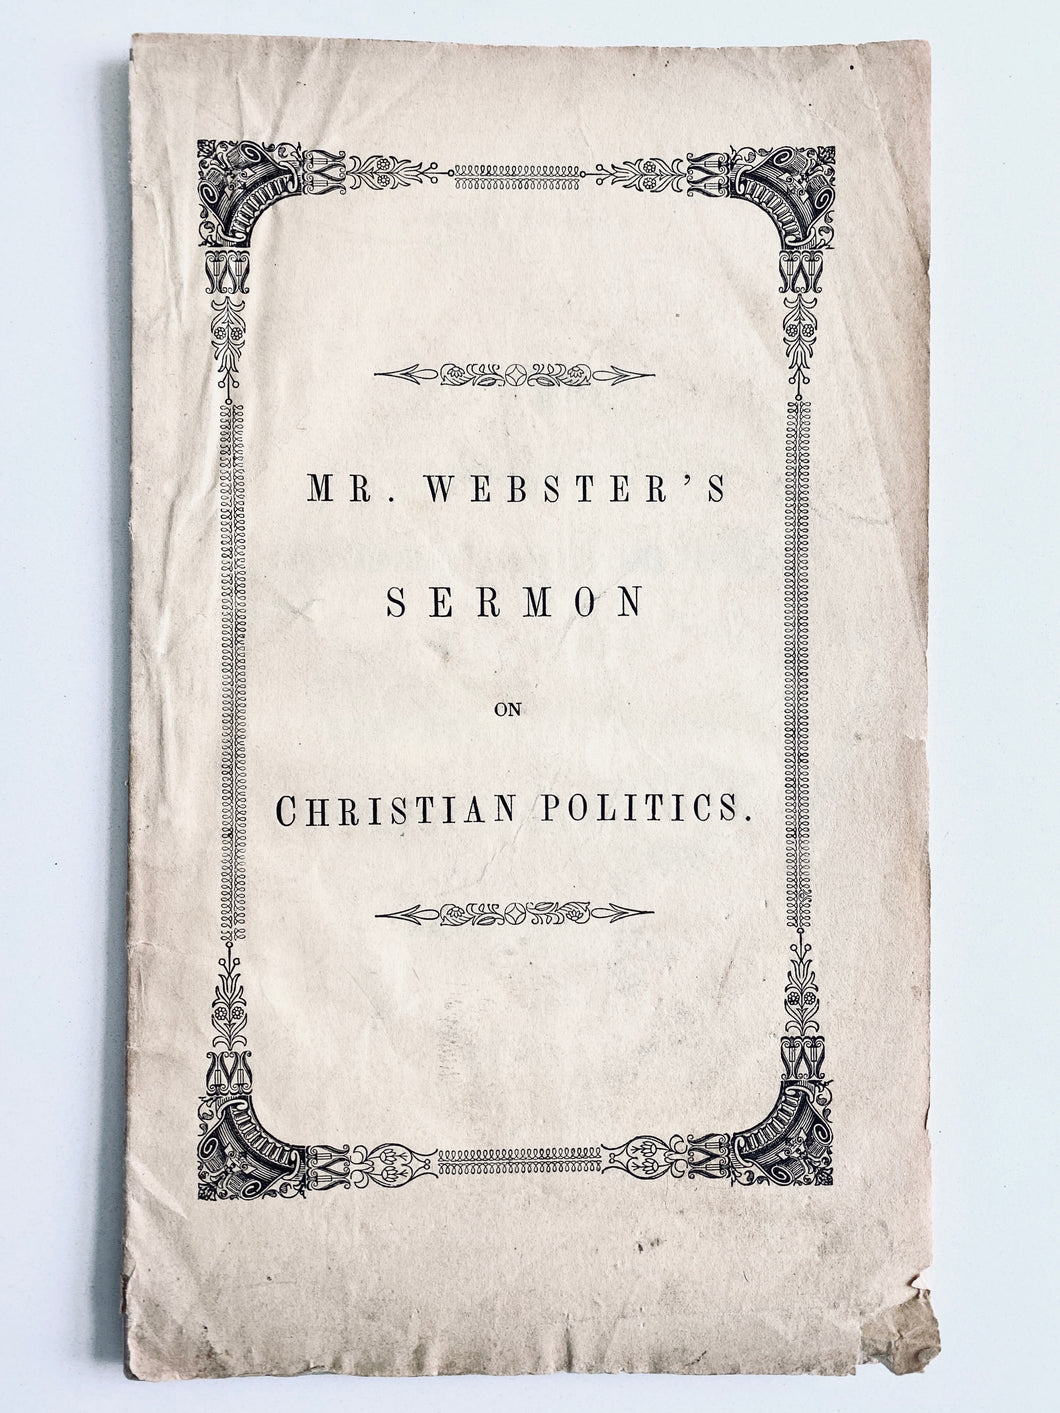 1846 J. C. WEBSTER. The Christian Minister and Politics. Blistering Against Compromising Heavenly Authority for Political Gain.